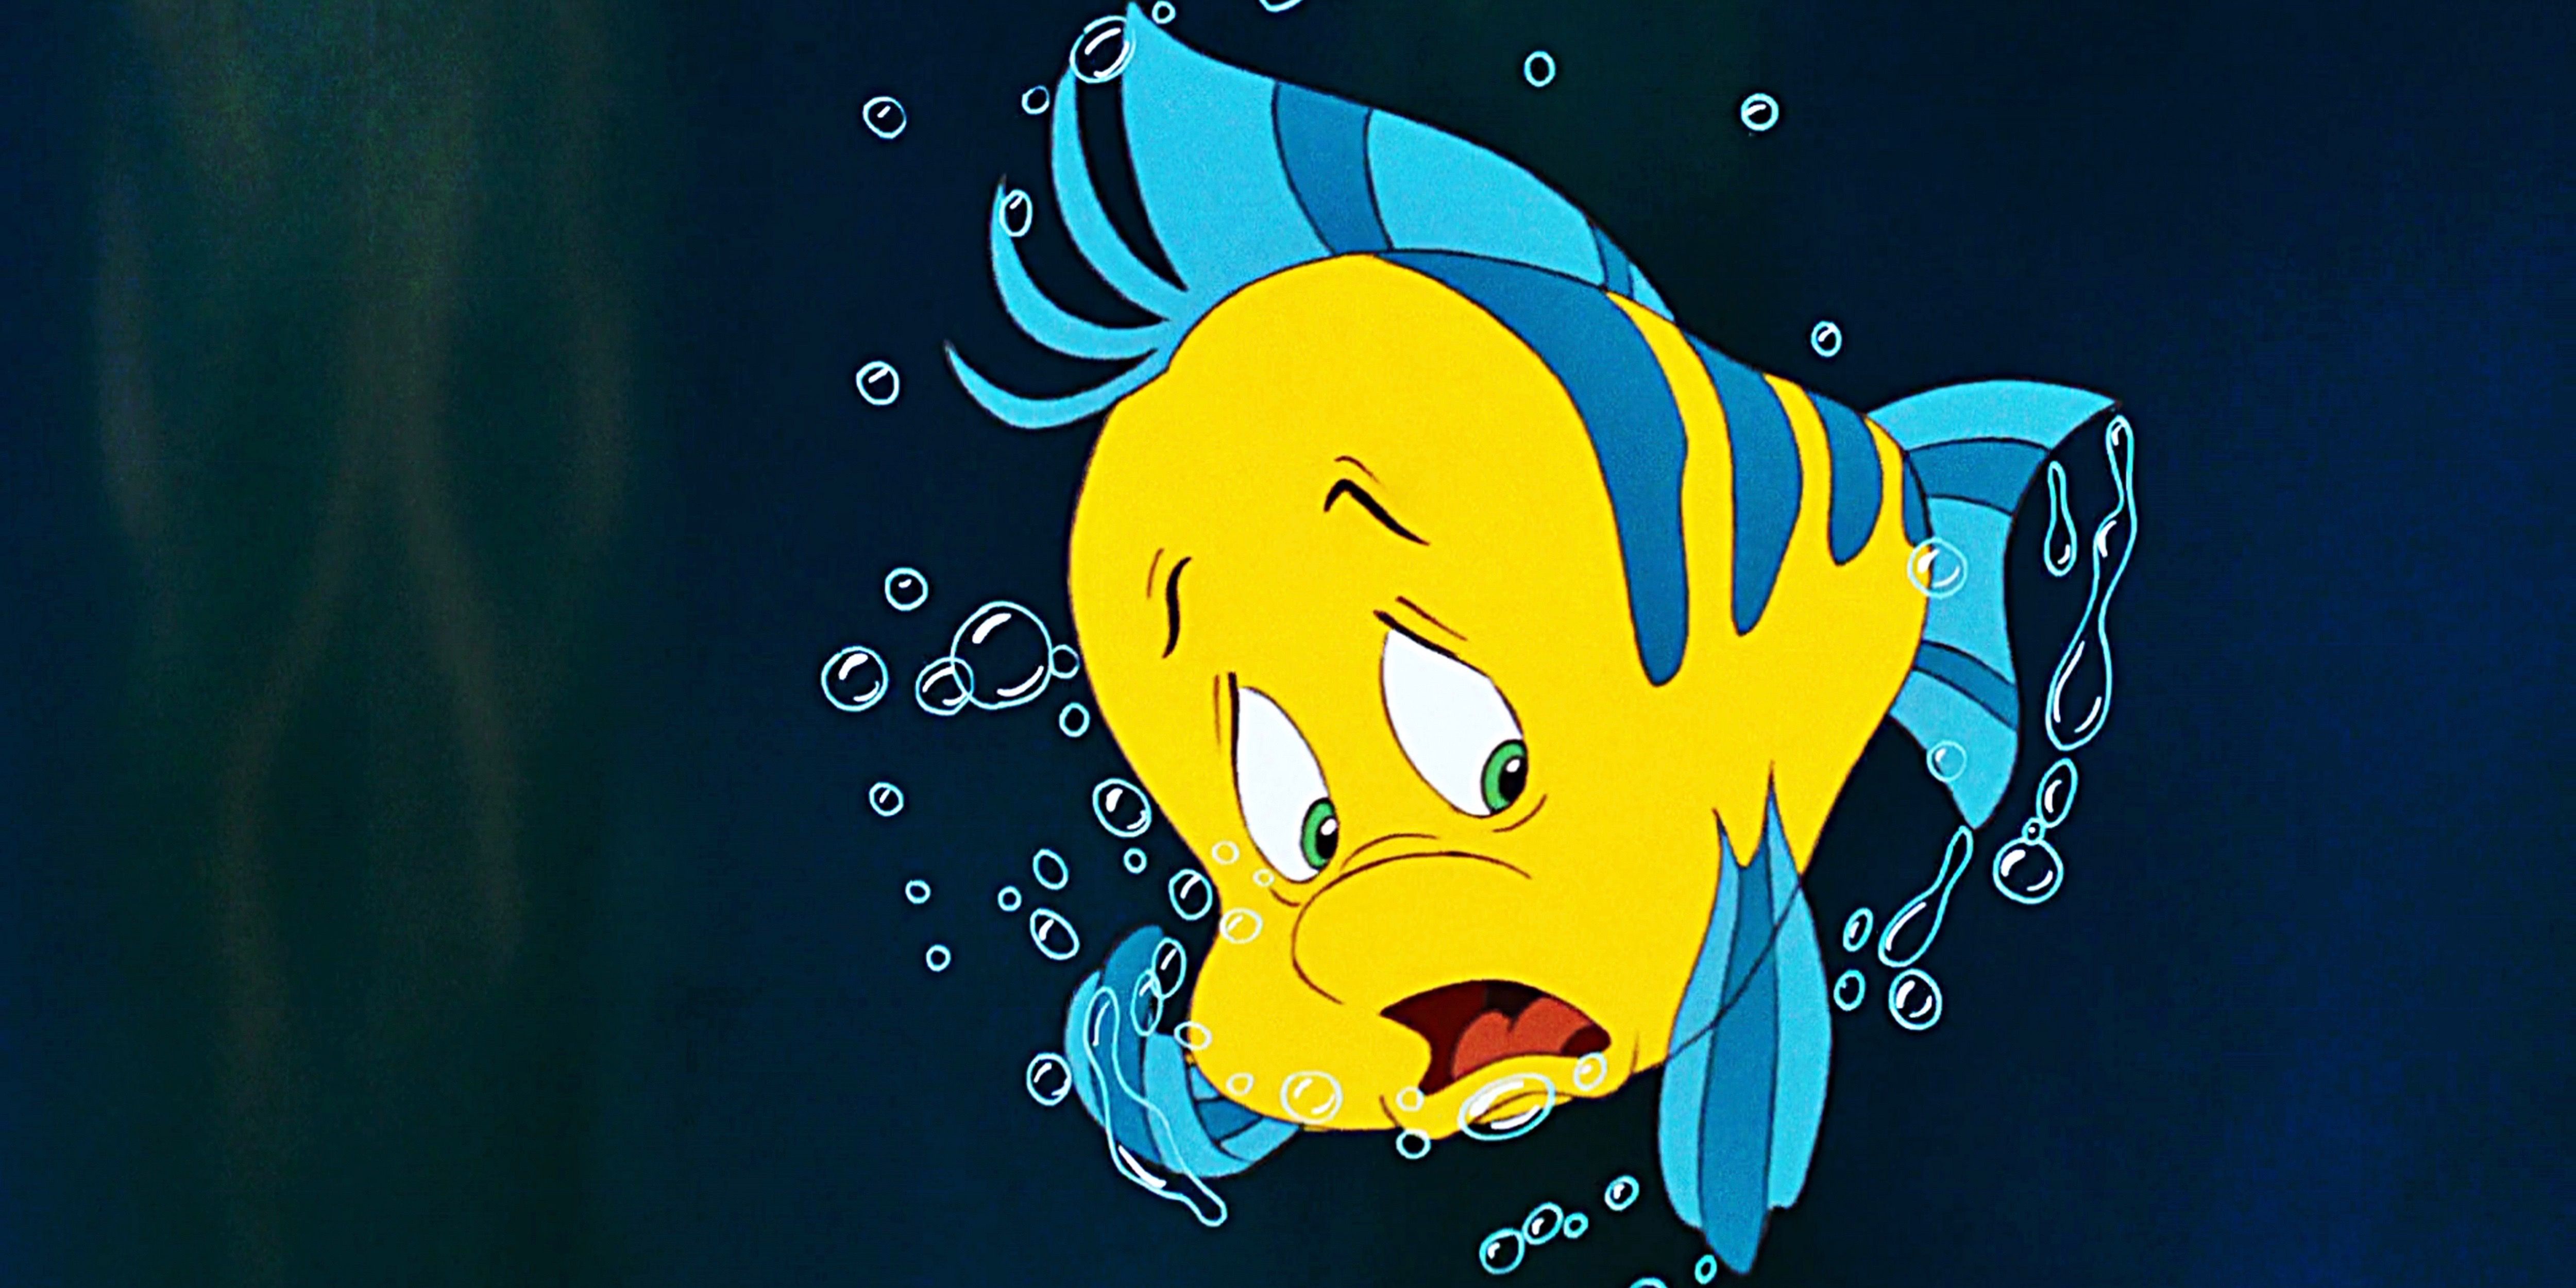 Flounder from The Little Mermaid